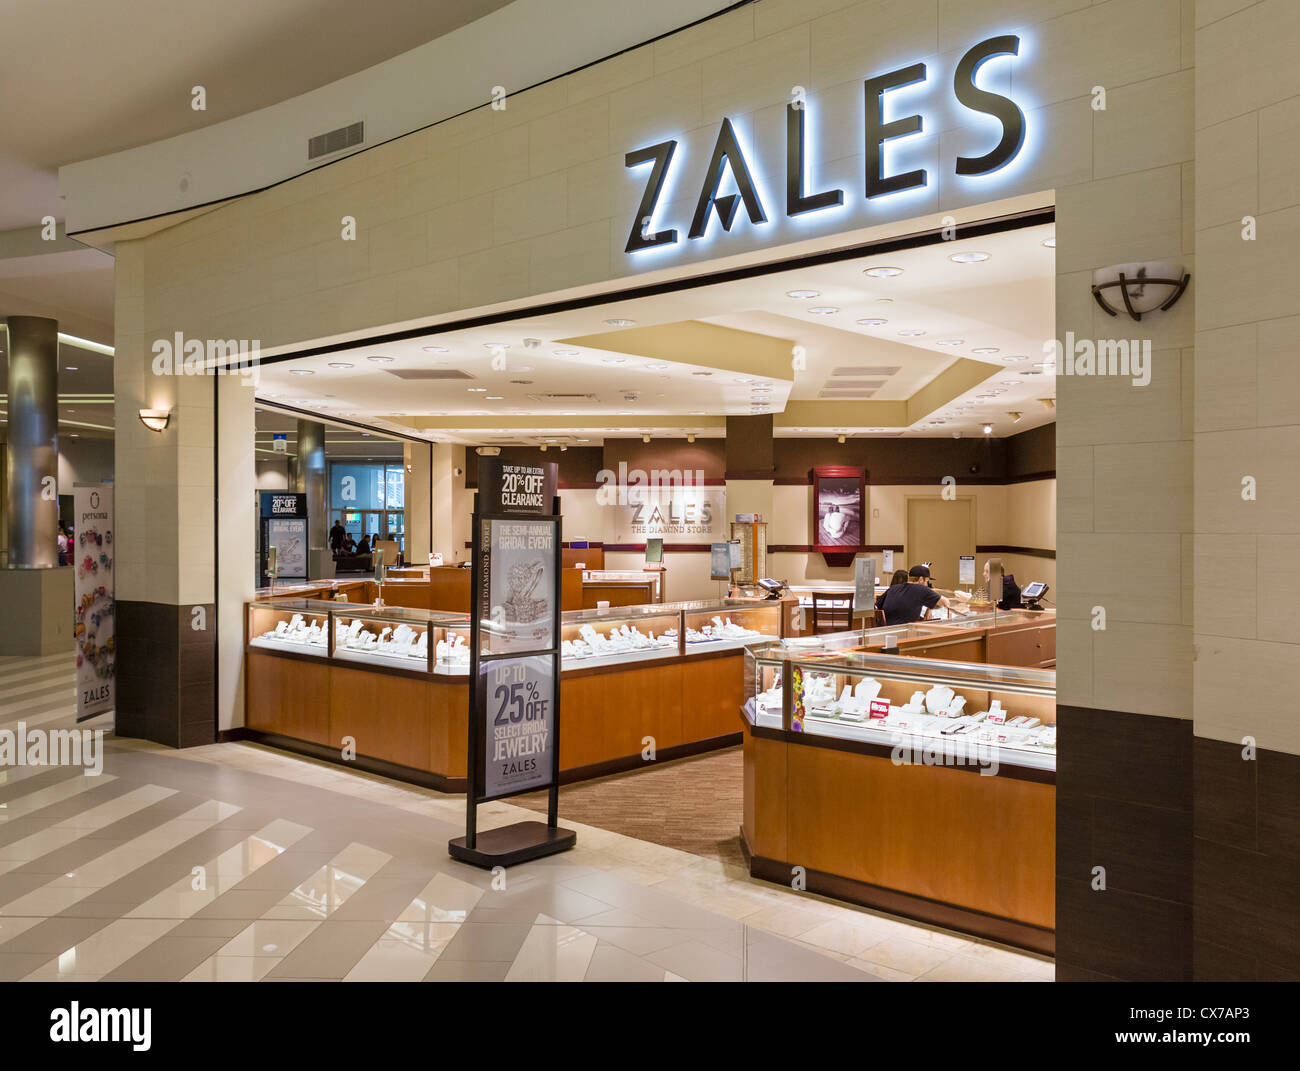 Zales Jewelry Store In The Mall Clearance Sale, UP TO 55% OFF |  www.taqueriadelalamillo.com